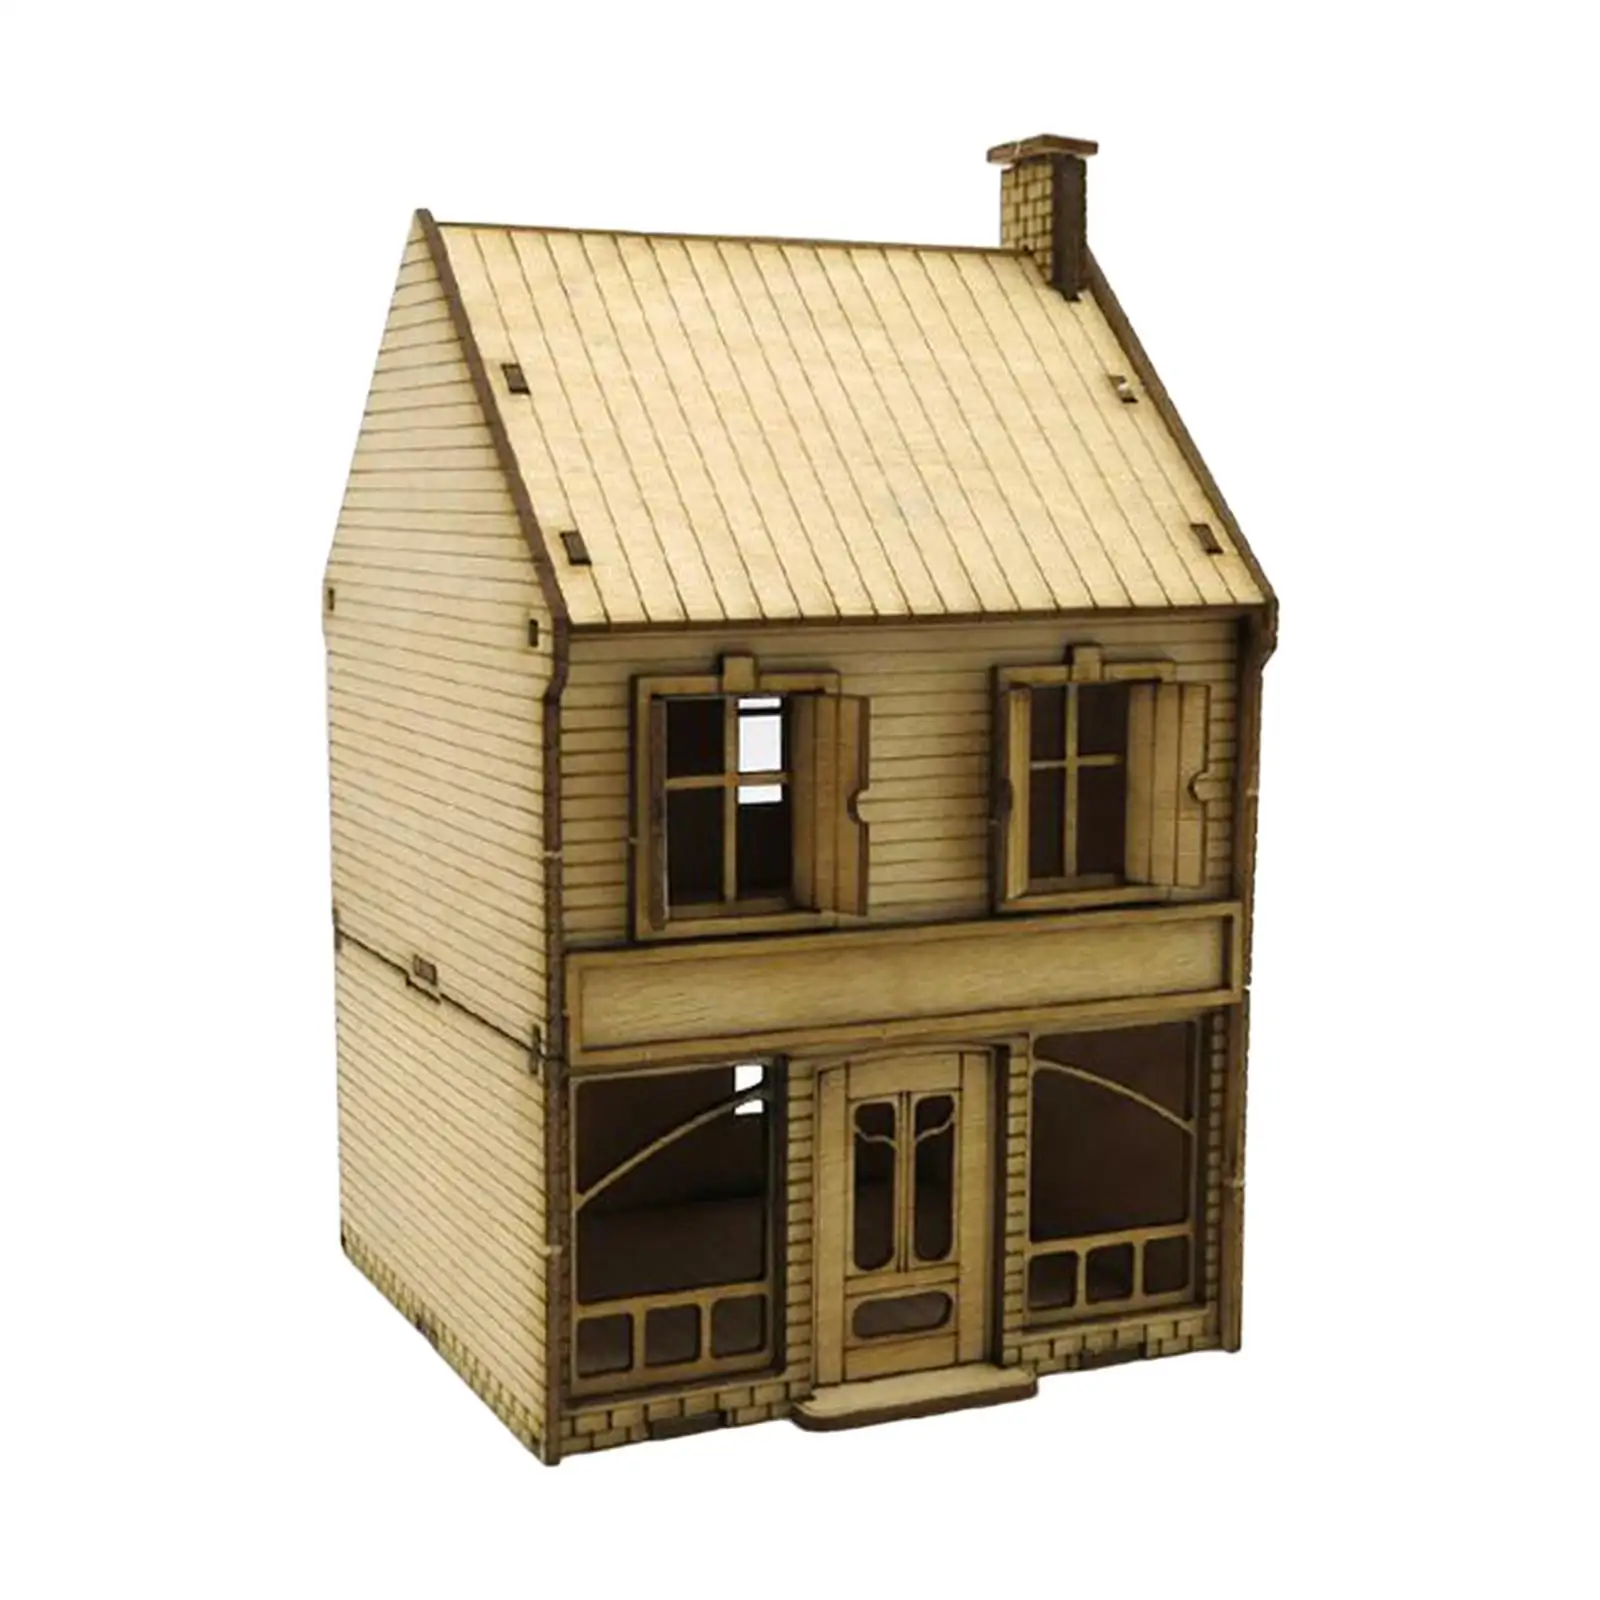 1/72 Wooden 2 Tier European House Puzzles Hobby Toys Layout Scenery for Diorama Sand Table Model Railway Accessory Decoration